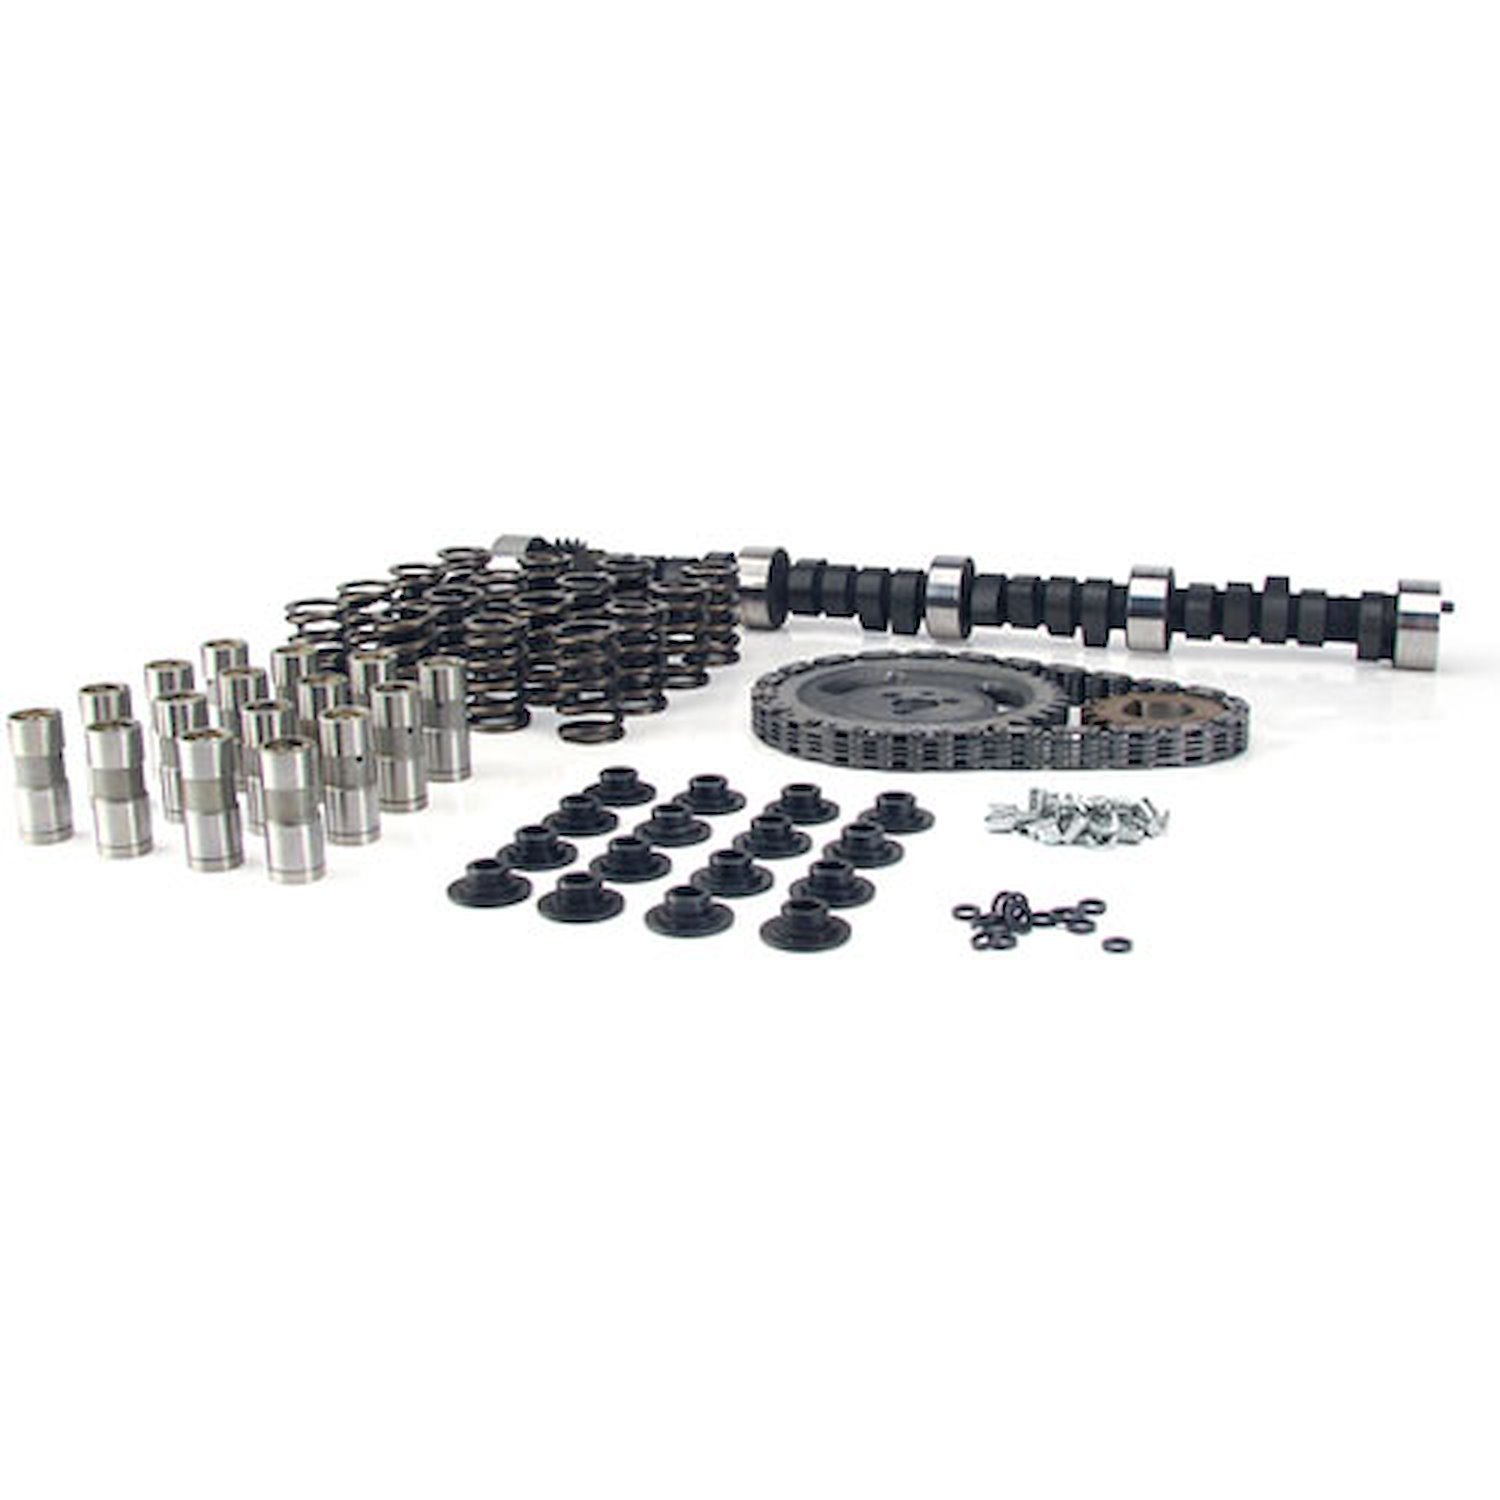 Xtreme Energy 268H Hydraulic Flat Tappet Camshaft Complete Kit Lift: .515" /.520" Duration: 268°/280° RPM Range: 1600-5800